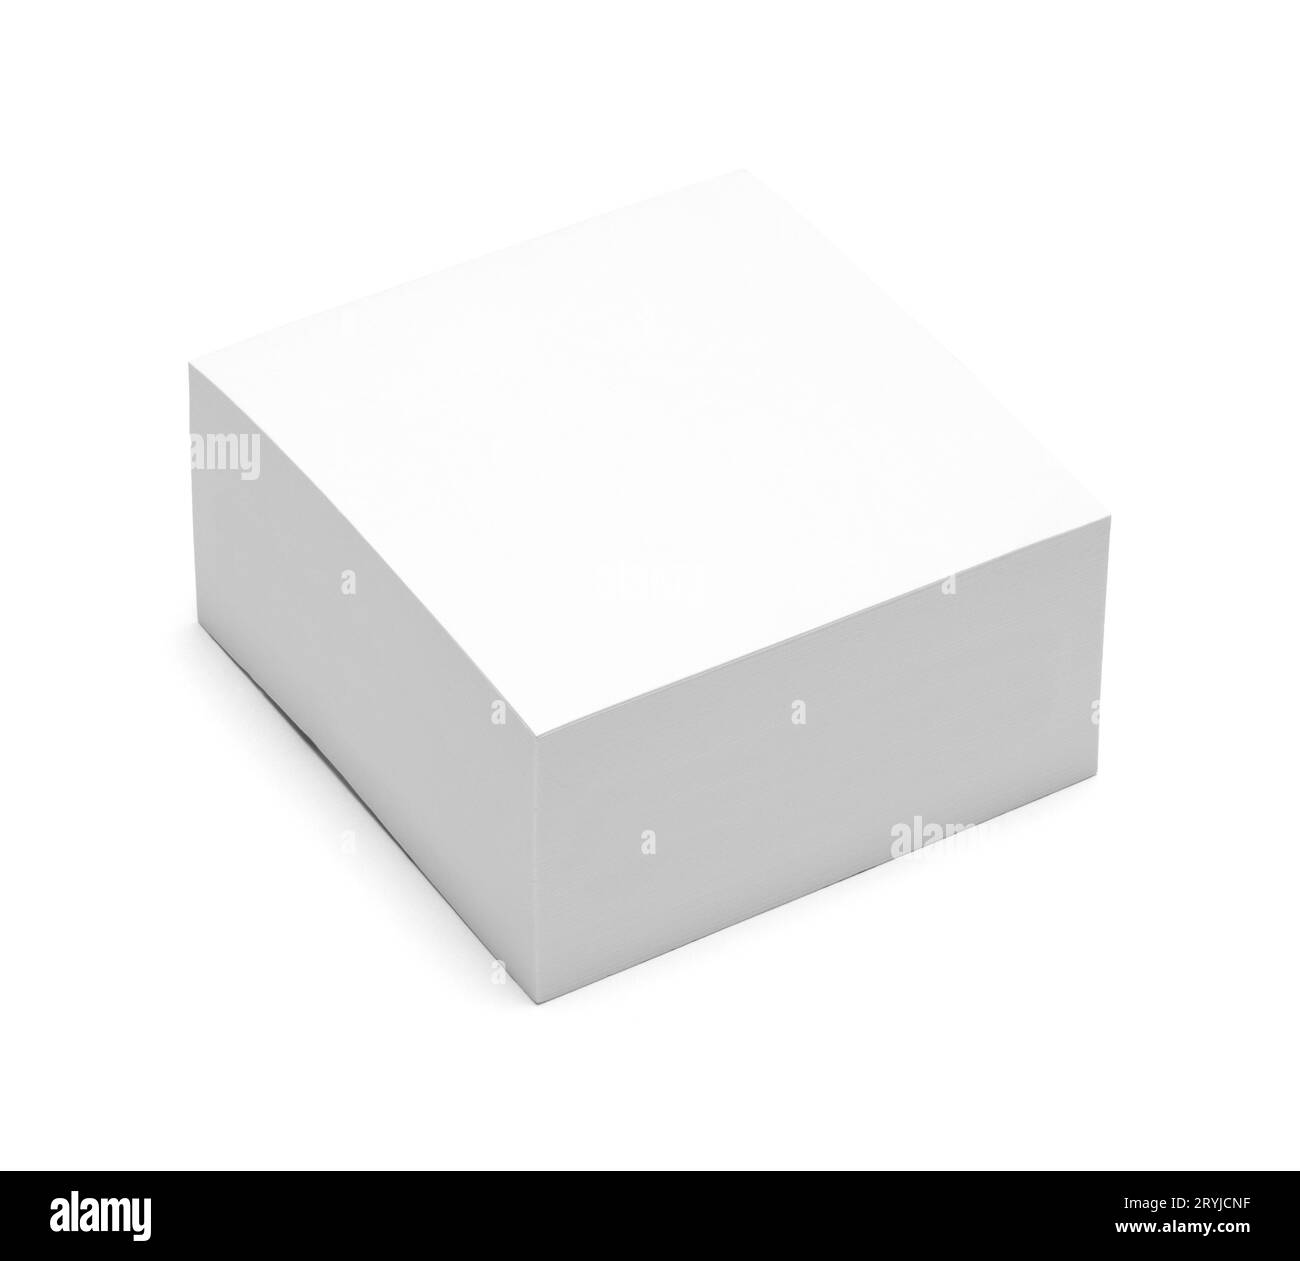 White Sticky Note Pad On Isolated Stock Photo, Picture and Royalty Free  Image. Image 128756567.